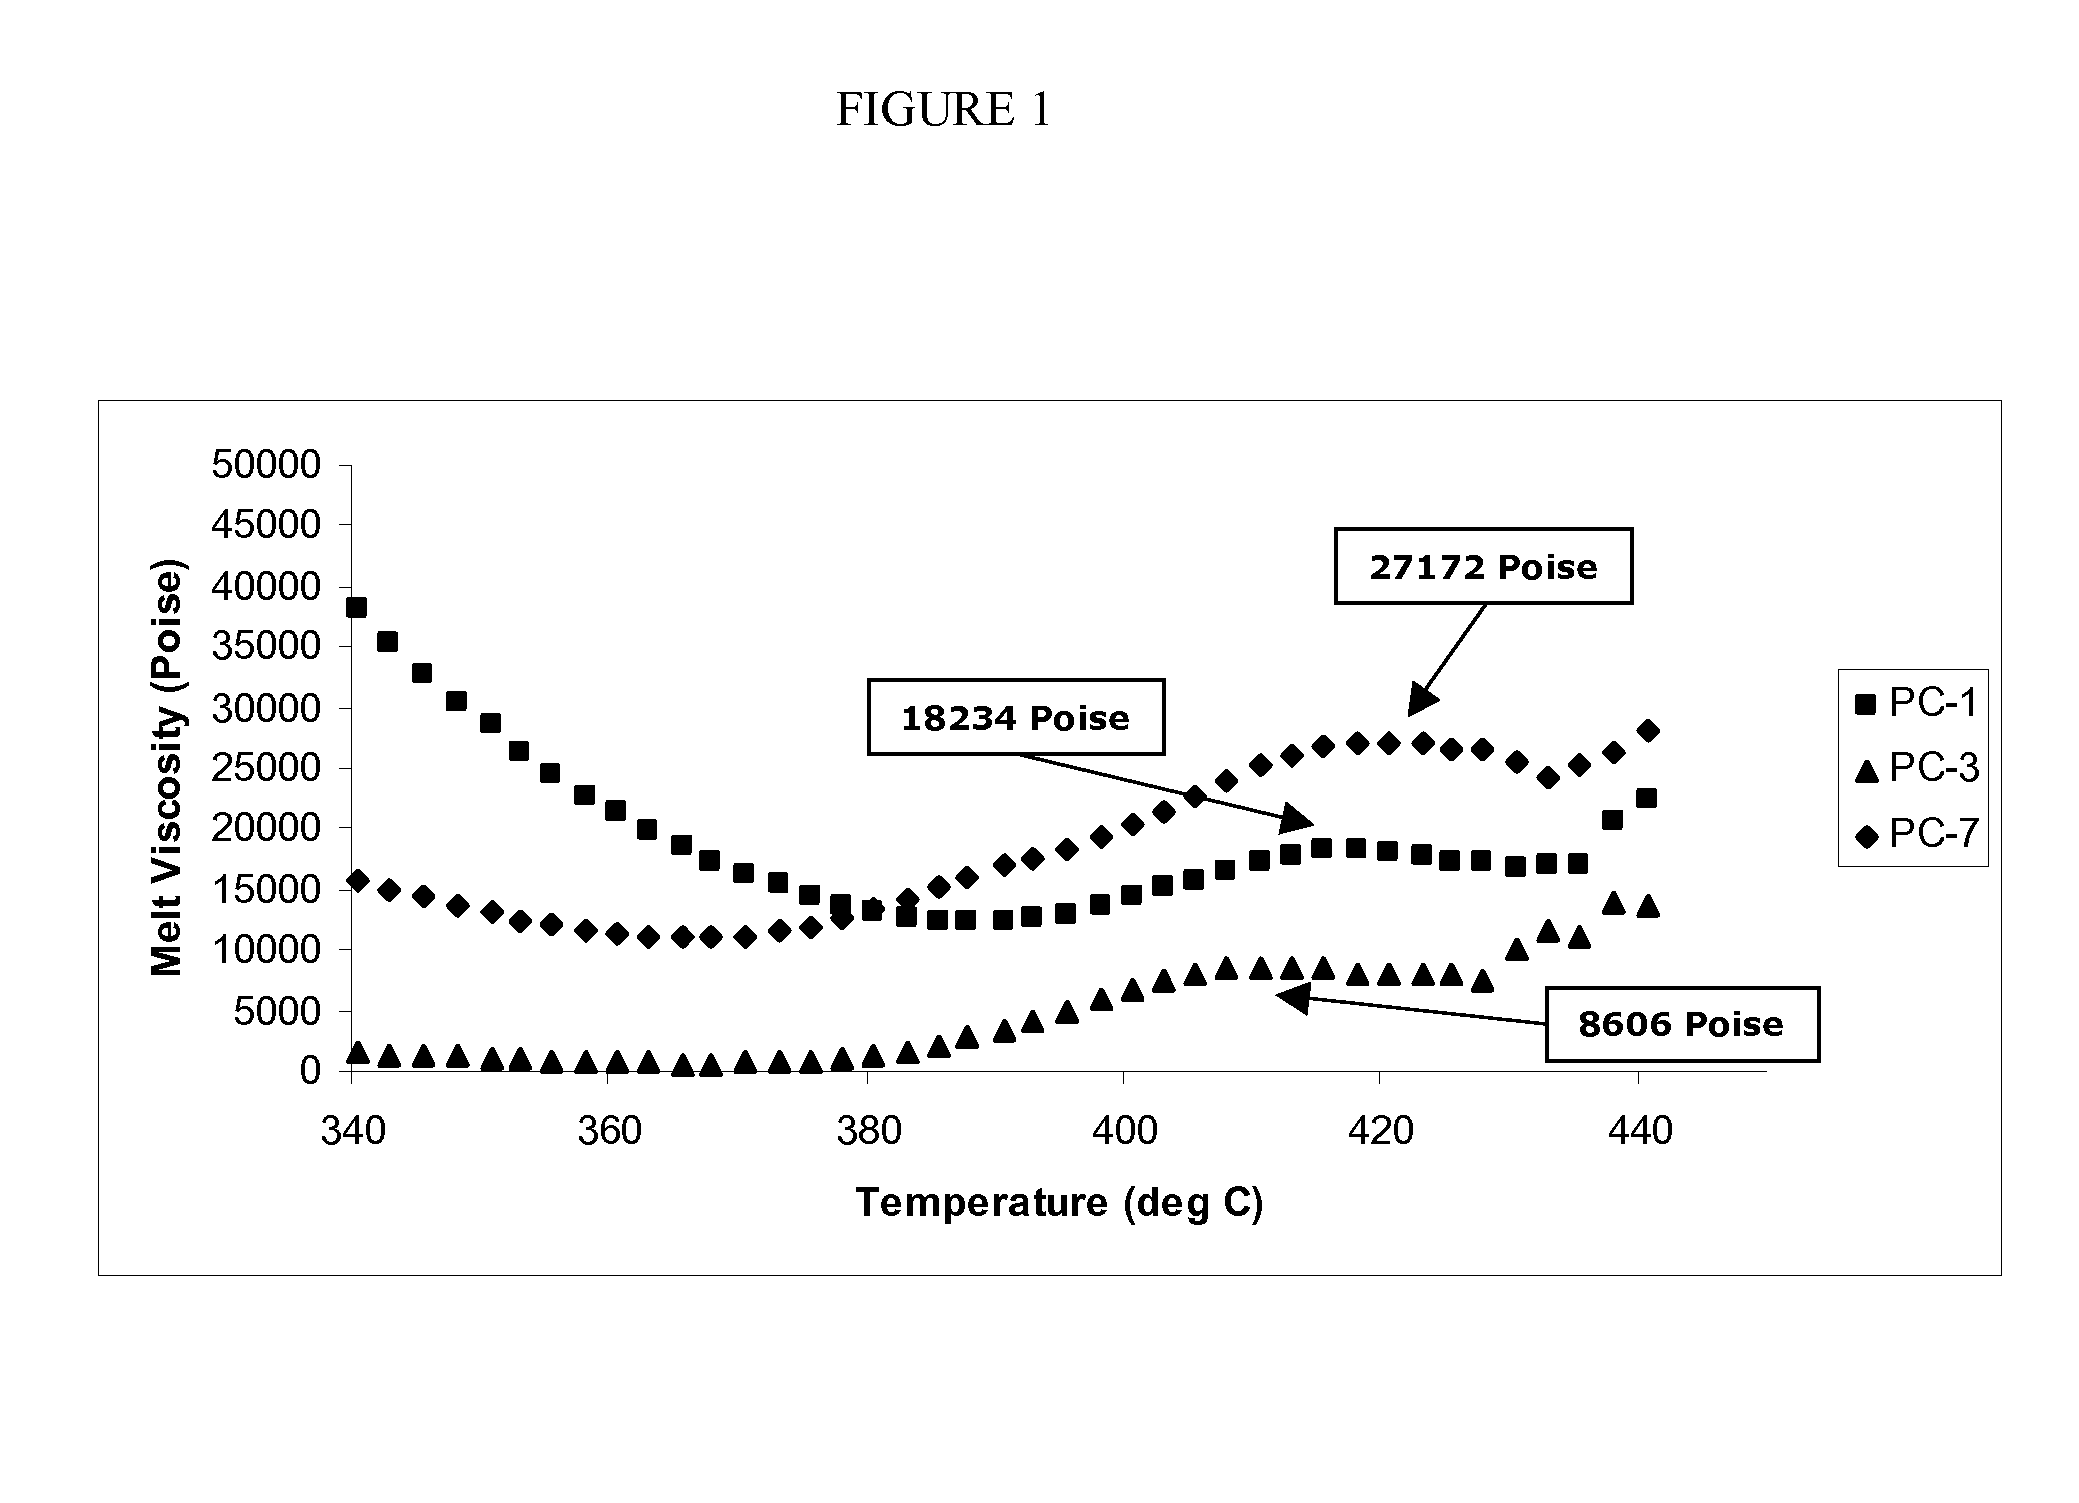 Compositions and articles of manufacture containing branched polycarbonate